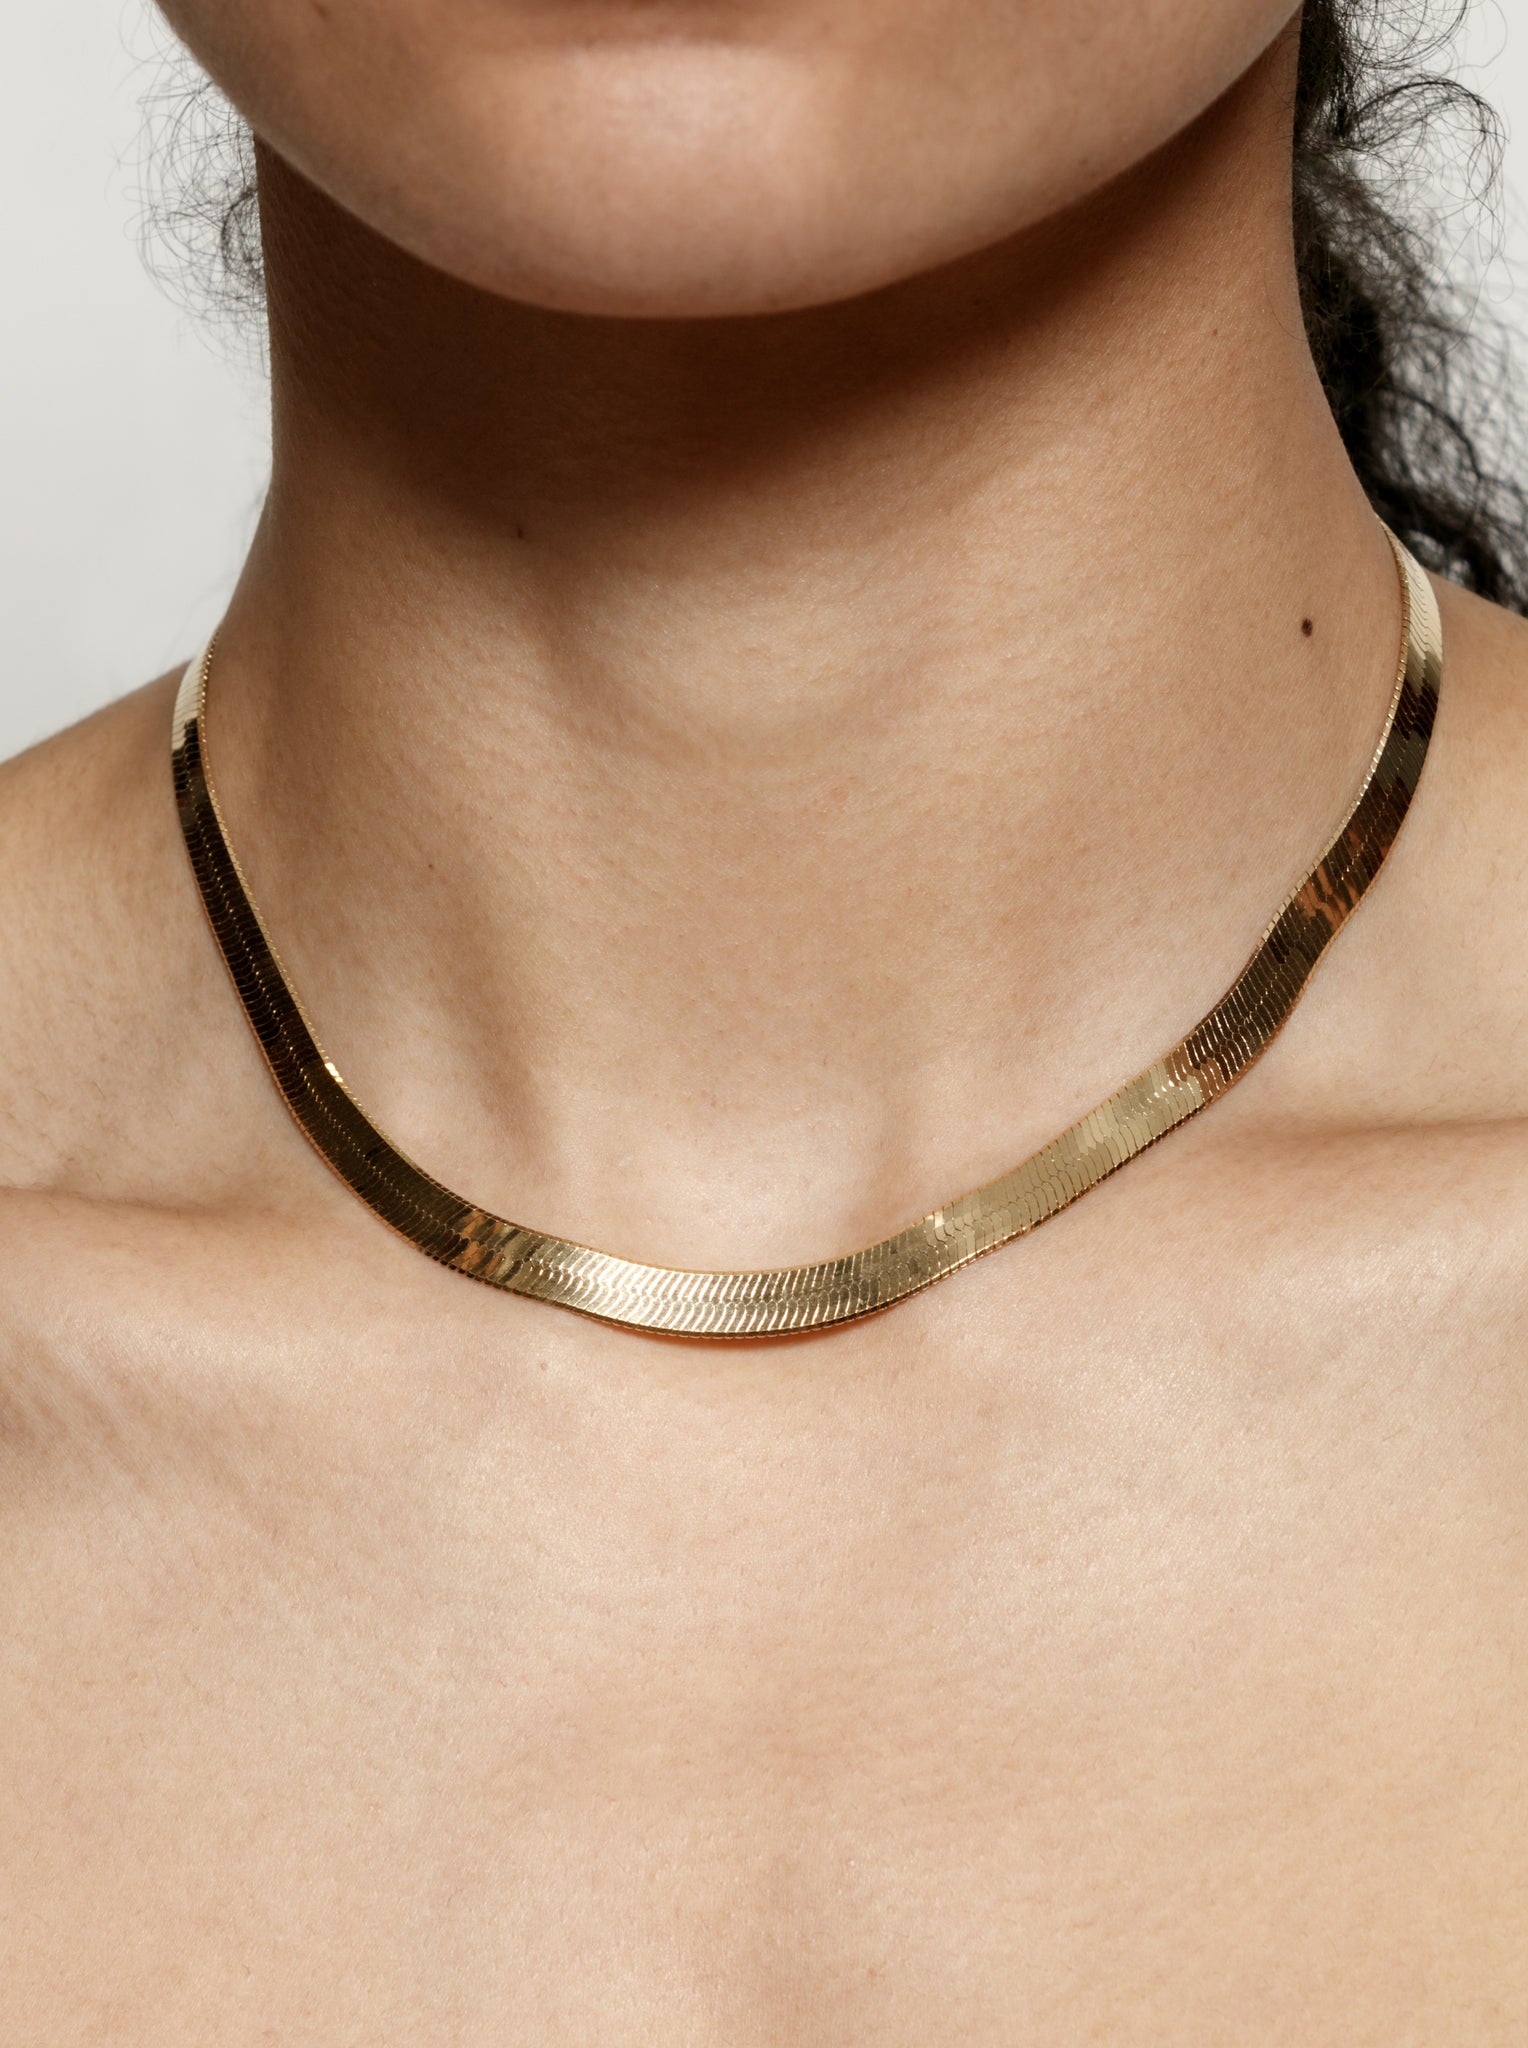 Wolf Circus Herringbone Chain Necklace in 14k Gold Vermeil-Necklaces-wolfcircus.com